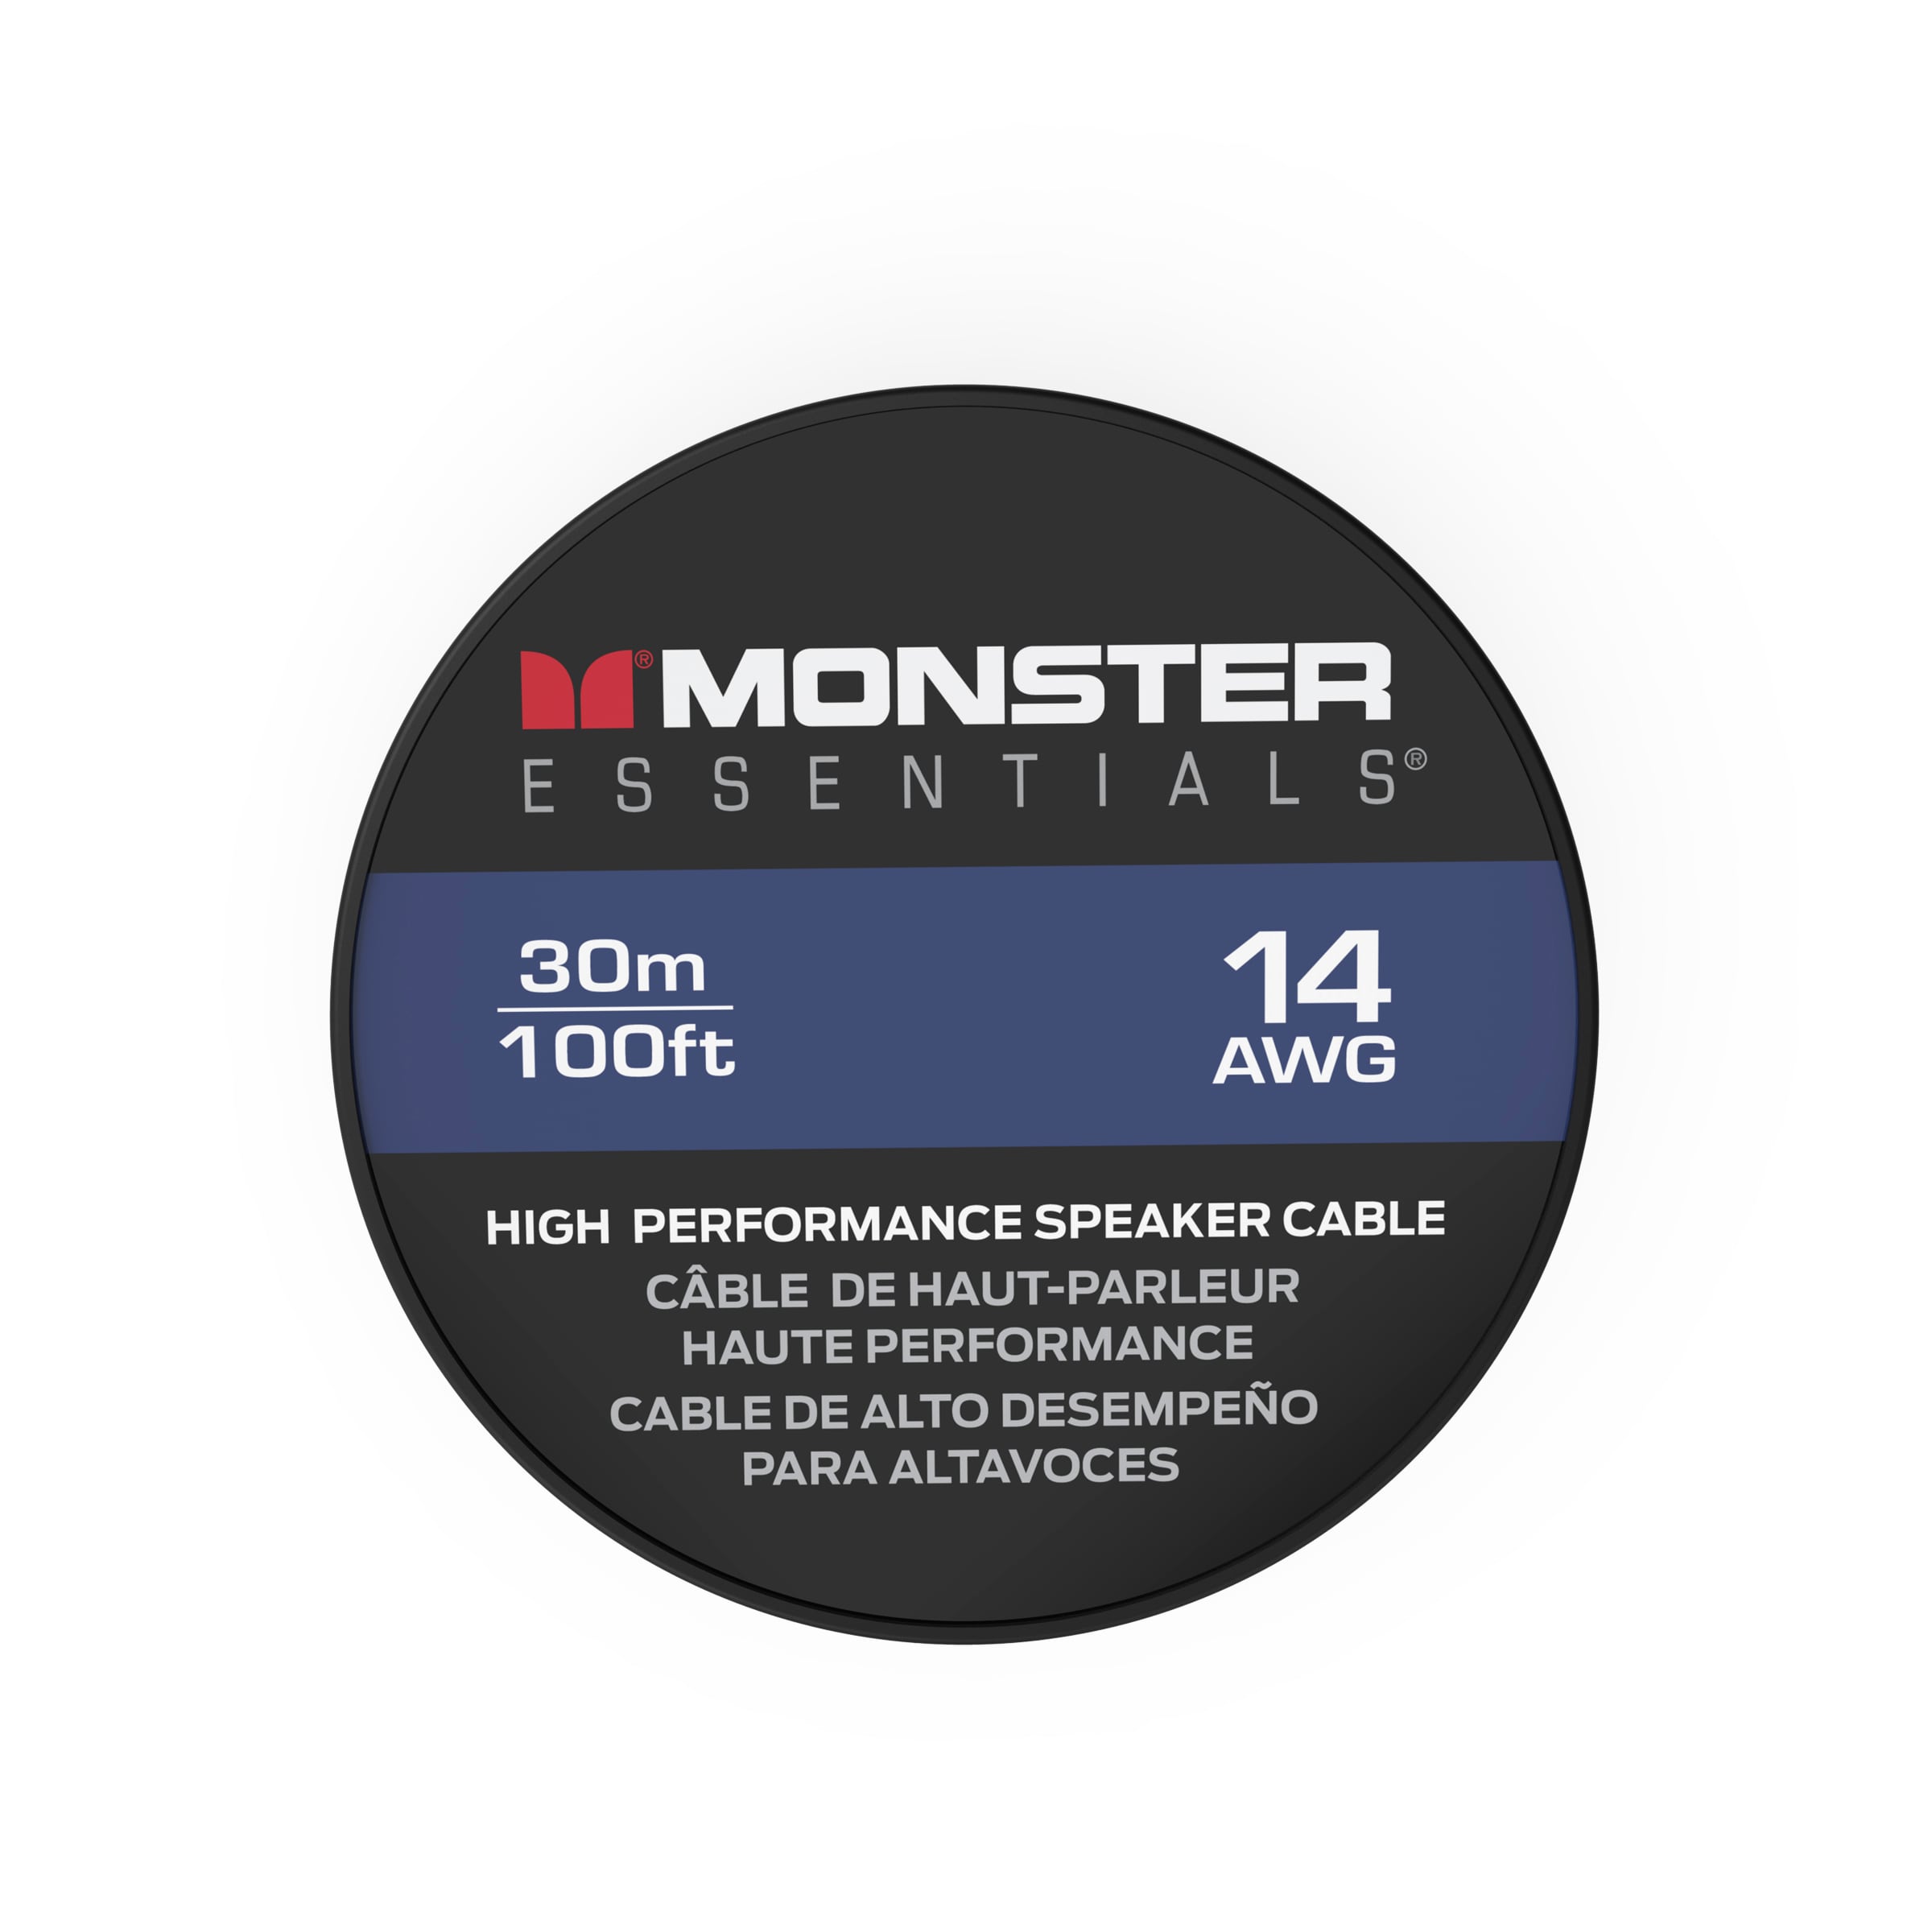 Monster XP Copper Clad Aluminum (cca) Speaker Wire Cable 100 ft Spool - Ideal for Car Audio Cable, Bronze